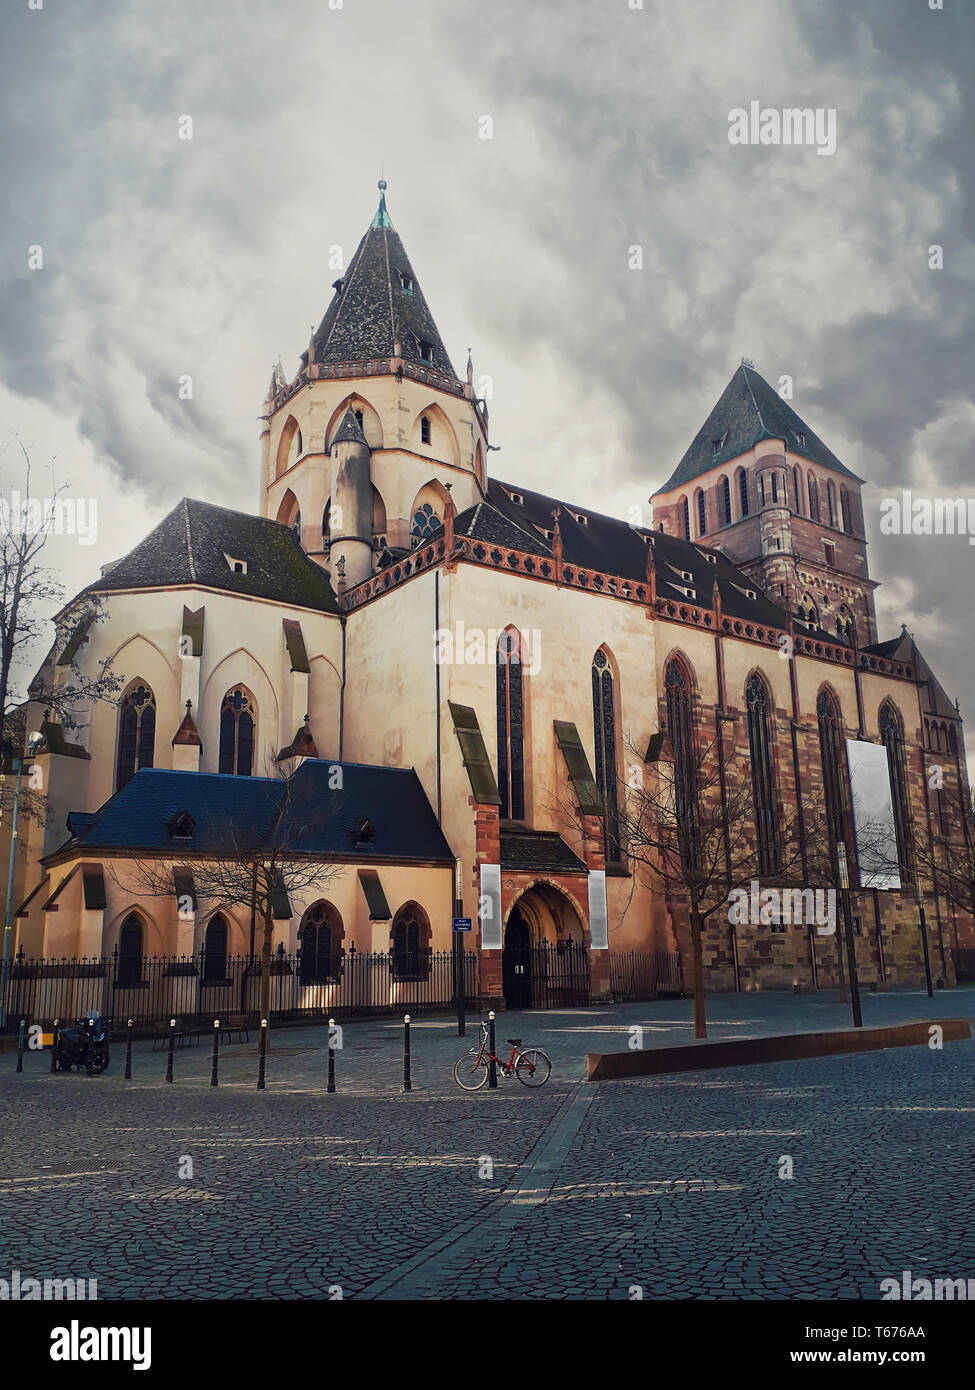 Saint Thomas church in Strasbourg, gloomy cloudy morning. Protestant cathedral, gothic architecture style. Strasbourg, Alsace, France Stock Photo